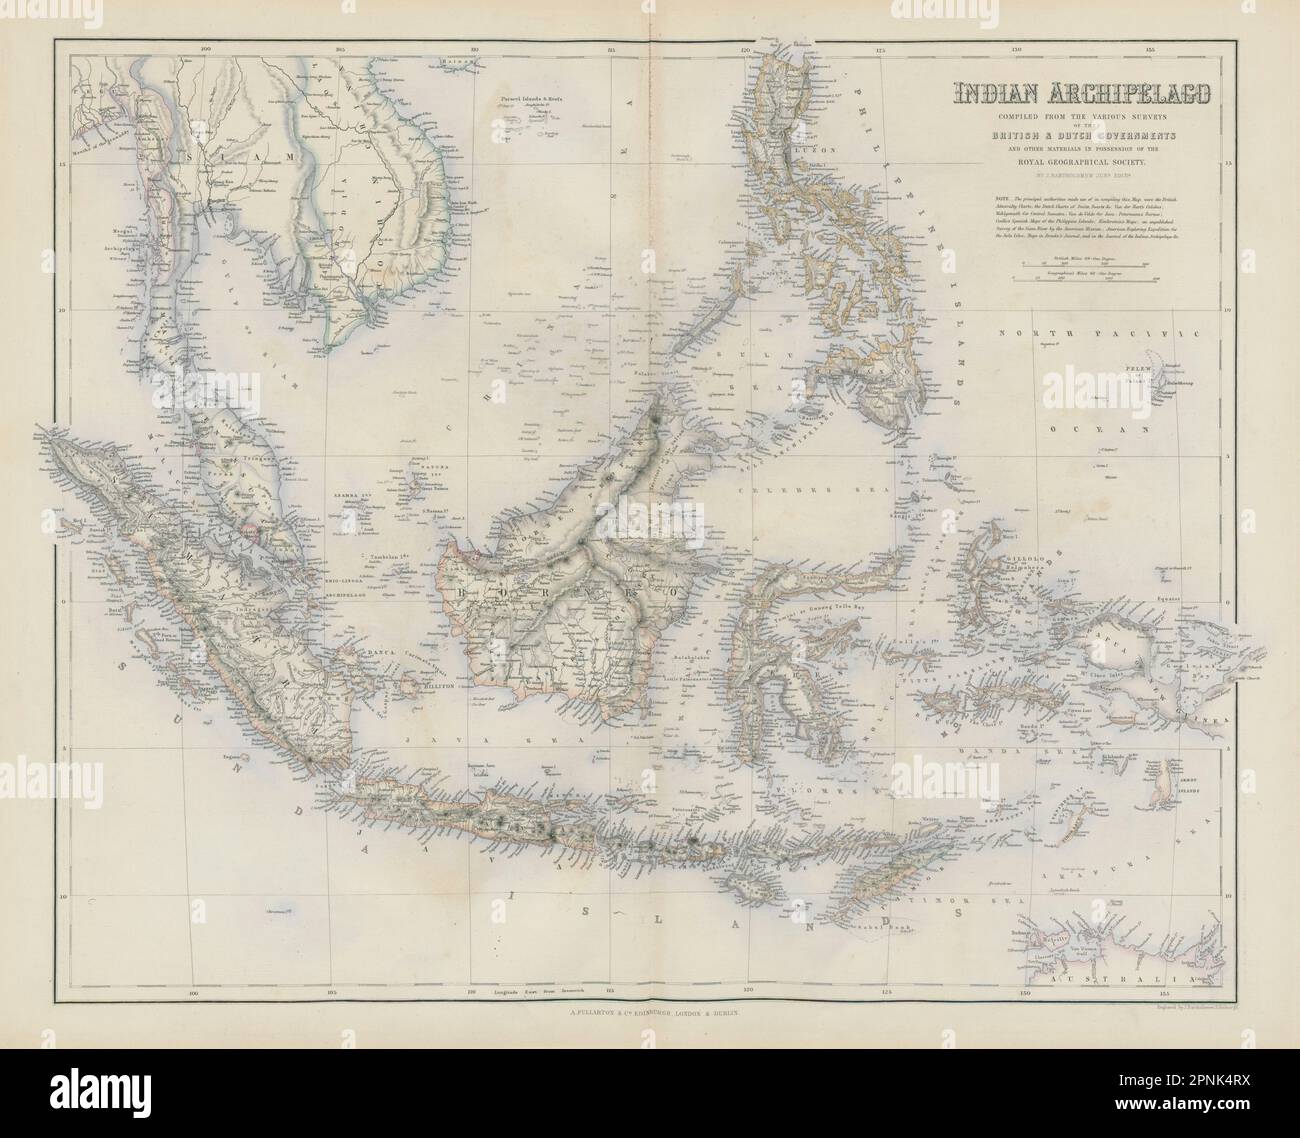 Indian Archipelago. East Indies Indonesia Philippines Malaysia SWANSTON 1860 map Stock Photo